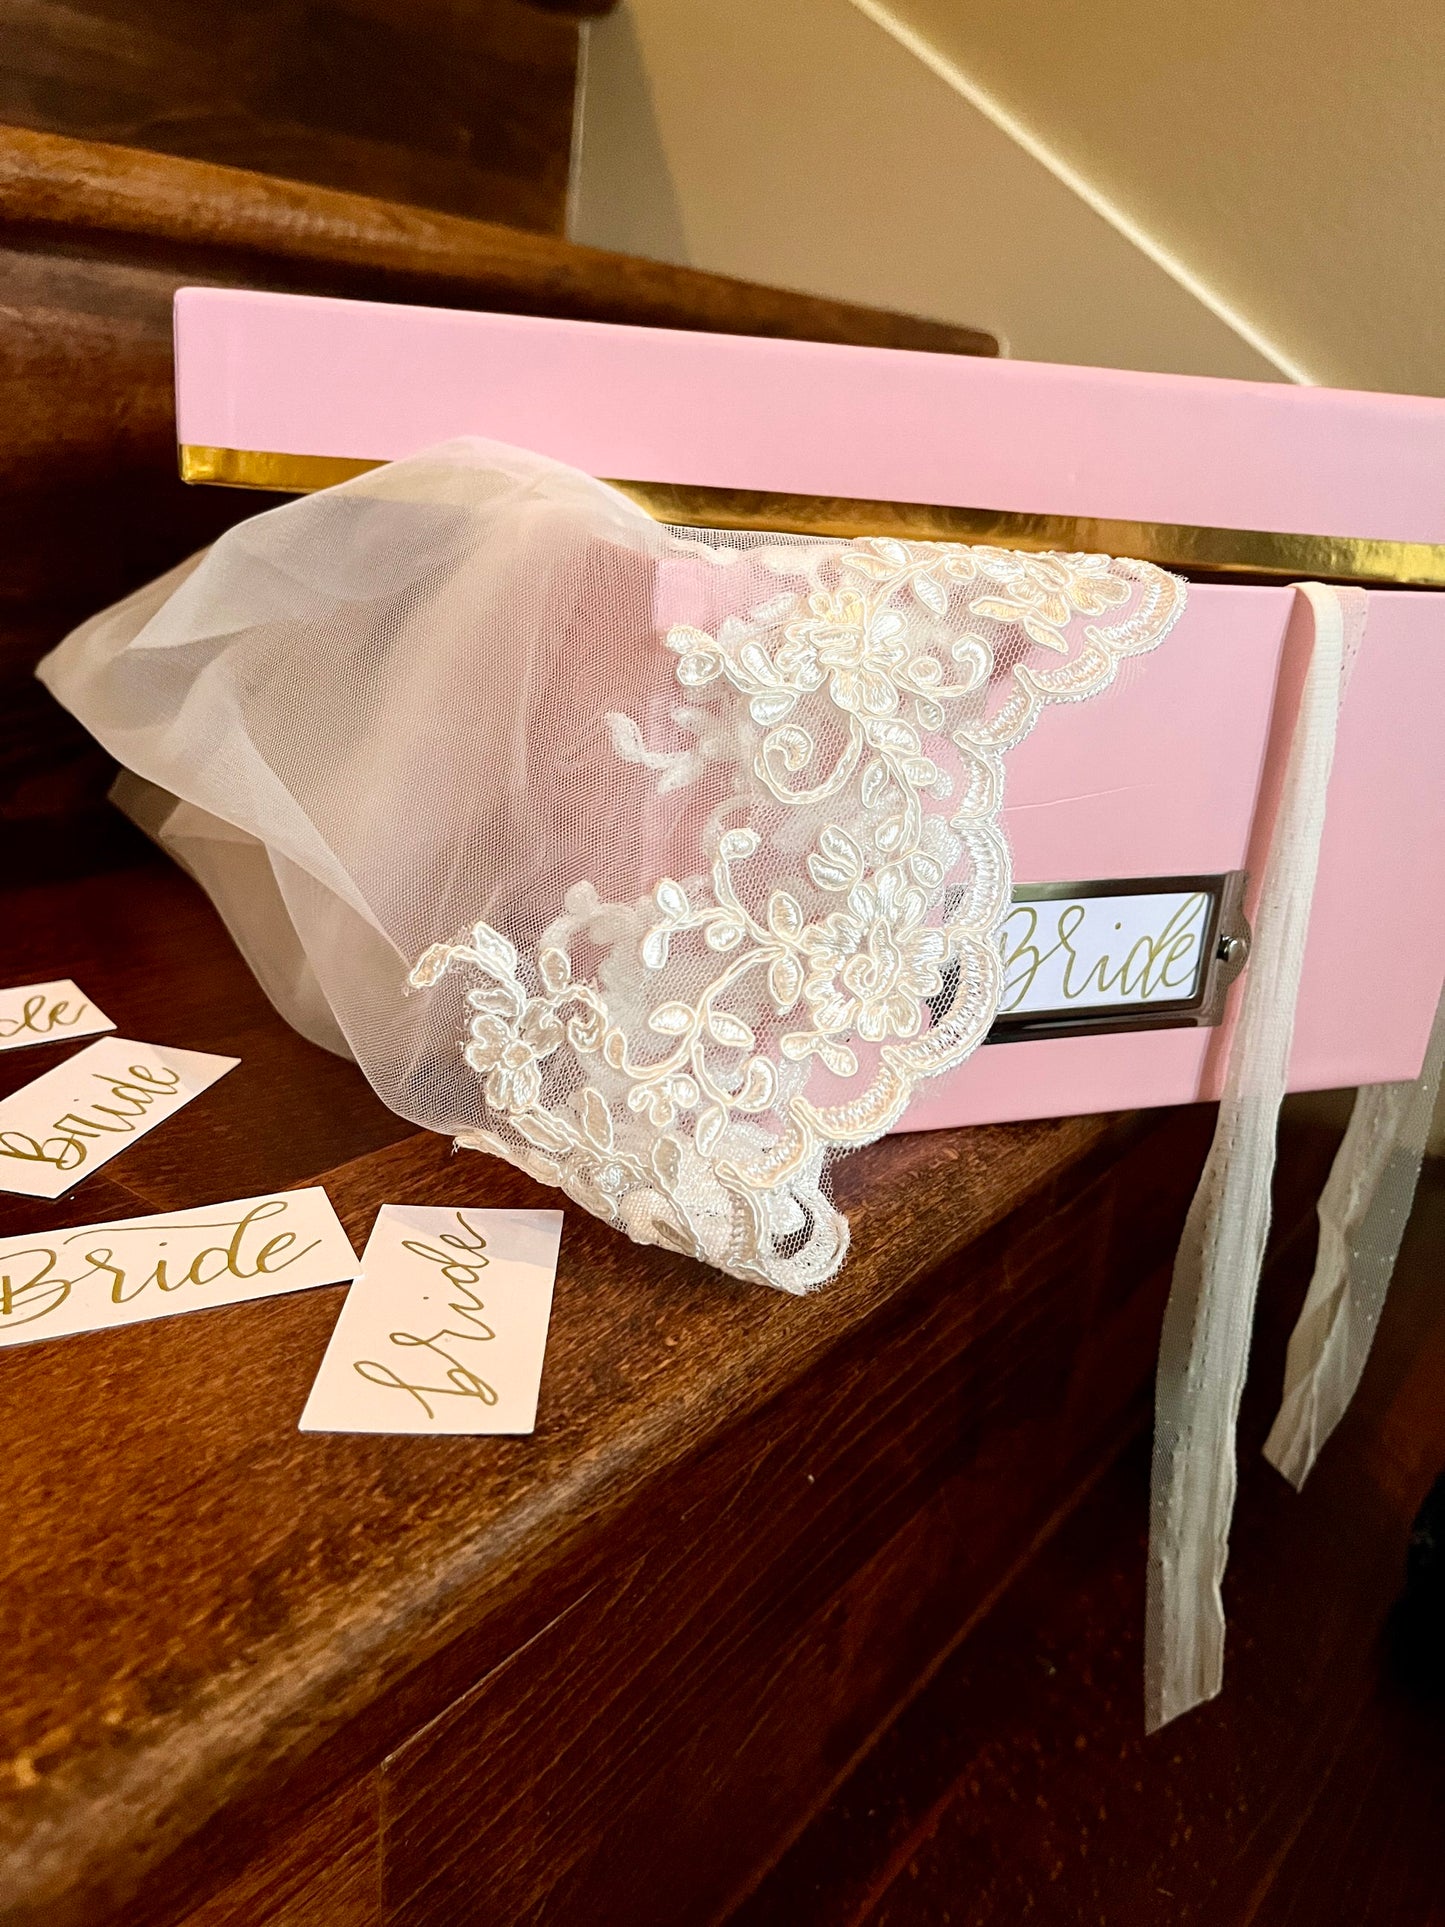 bride keepsake box with materials for wedding veil and dress